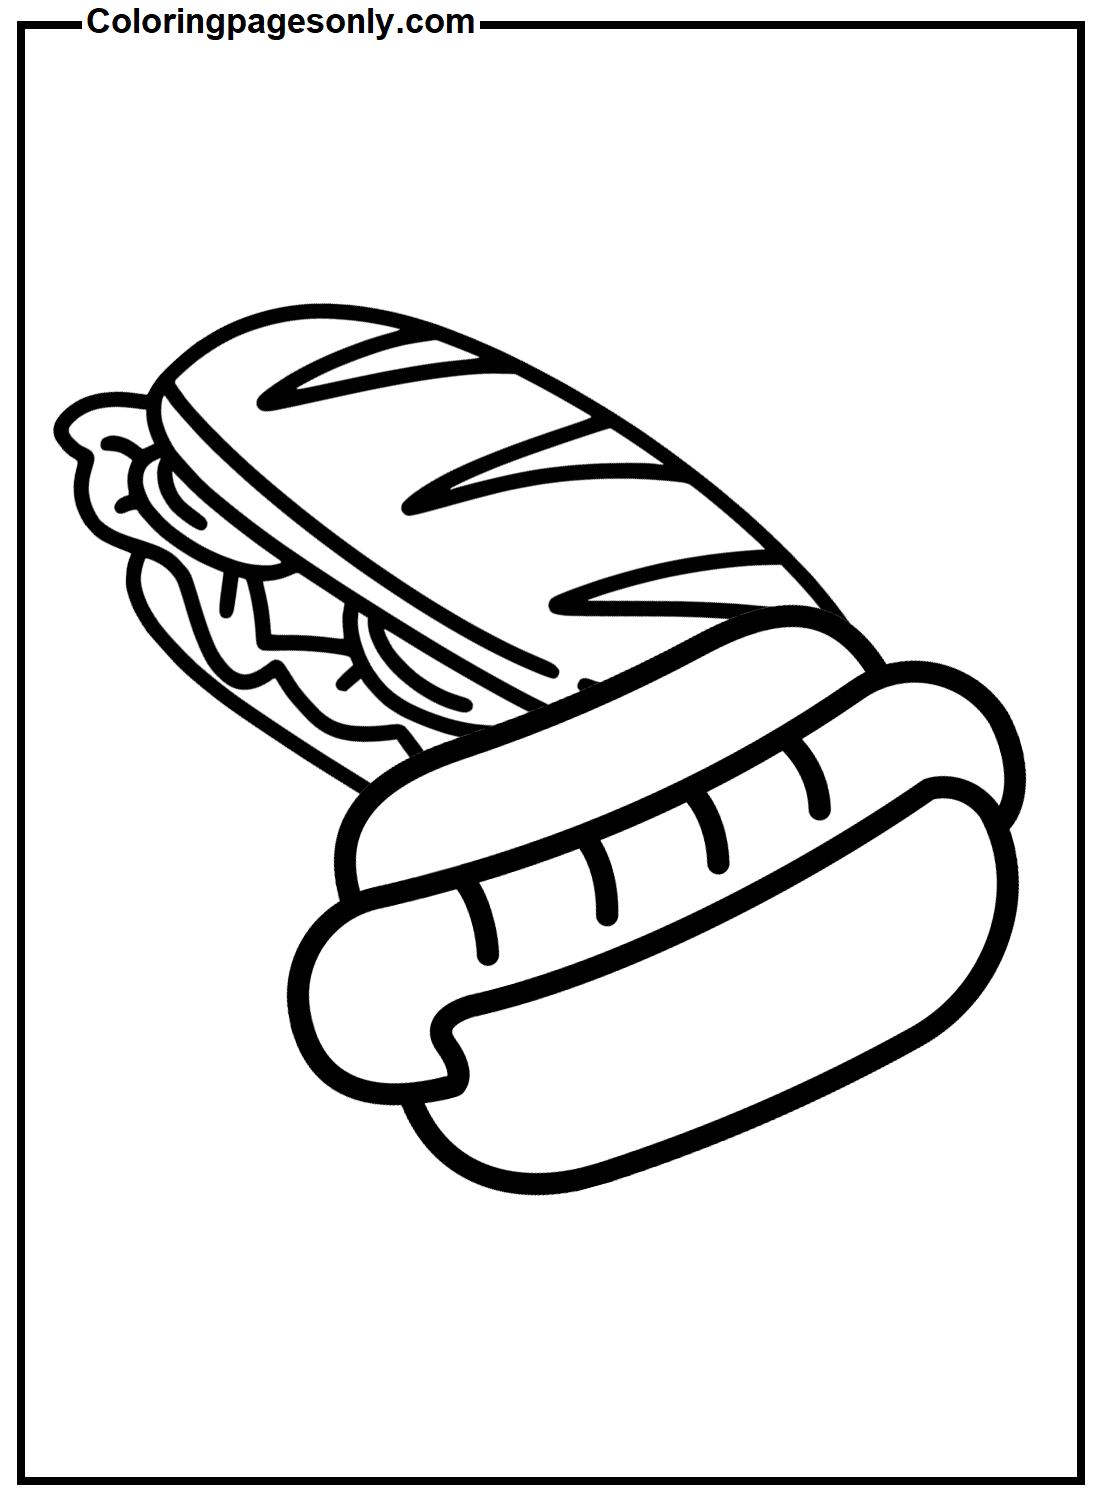 Hot Dog With Sandwich Coloring Pages